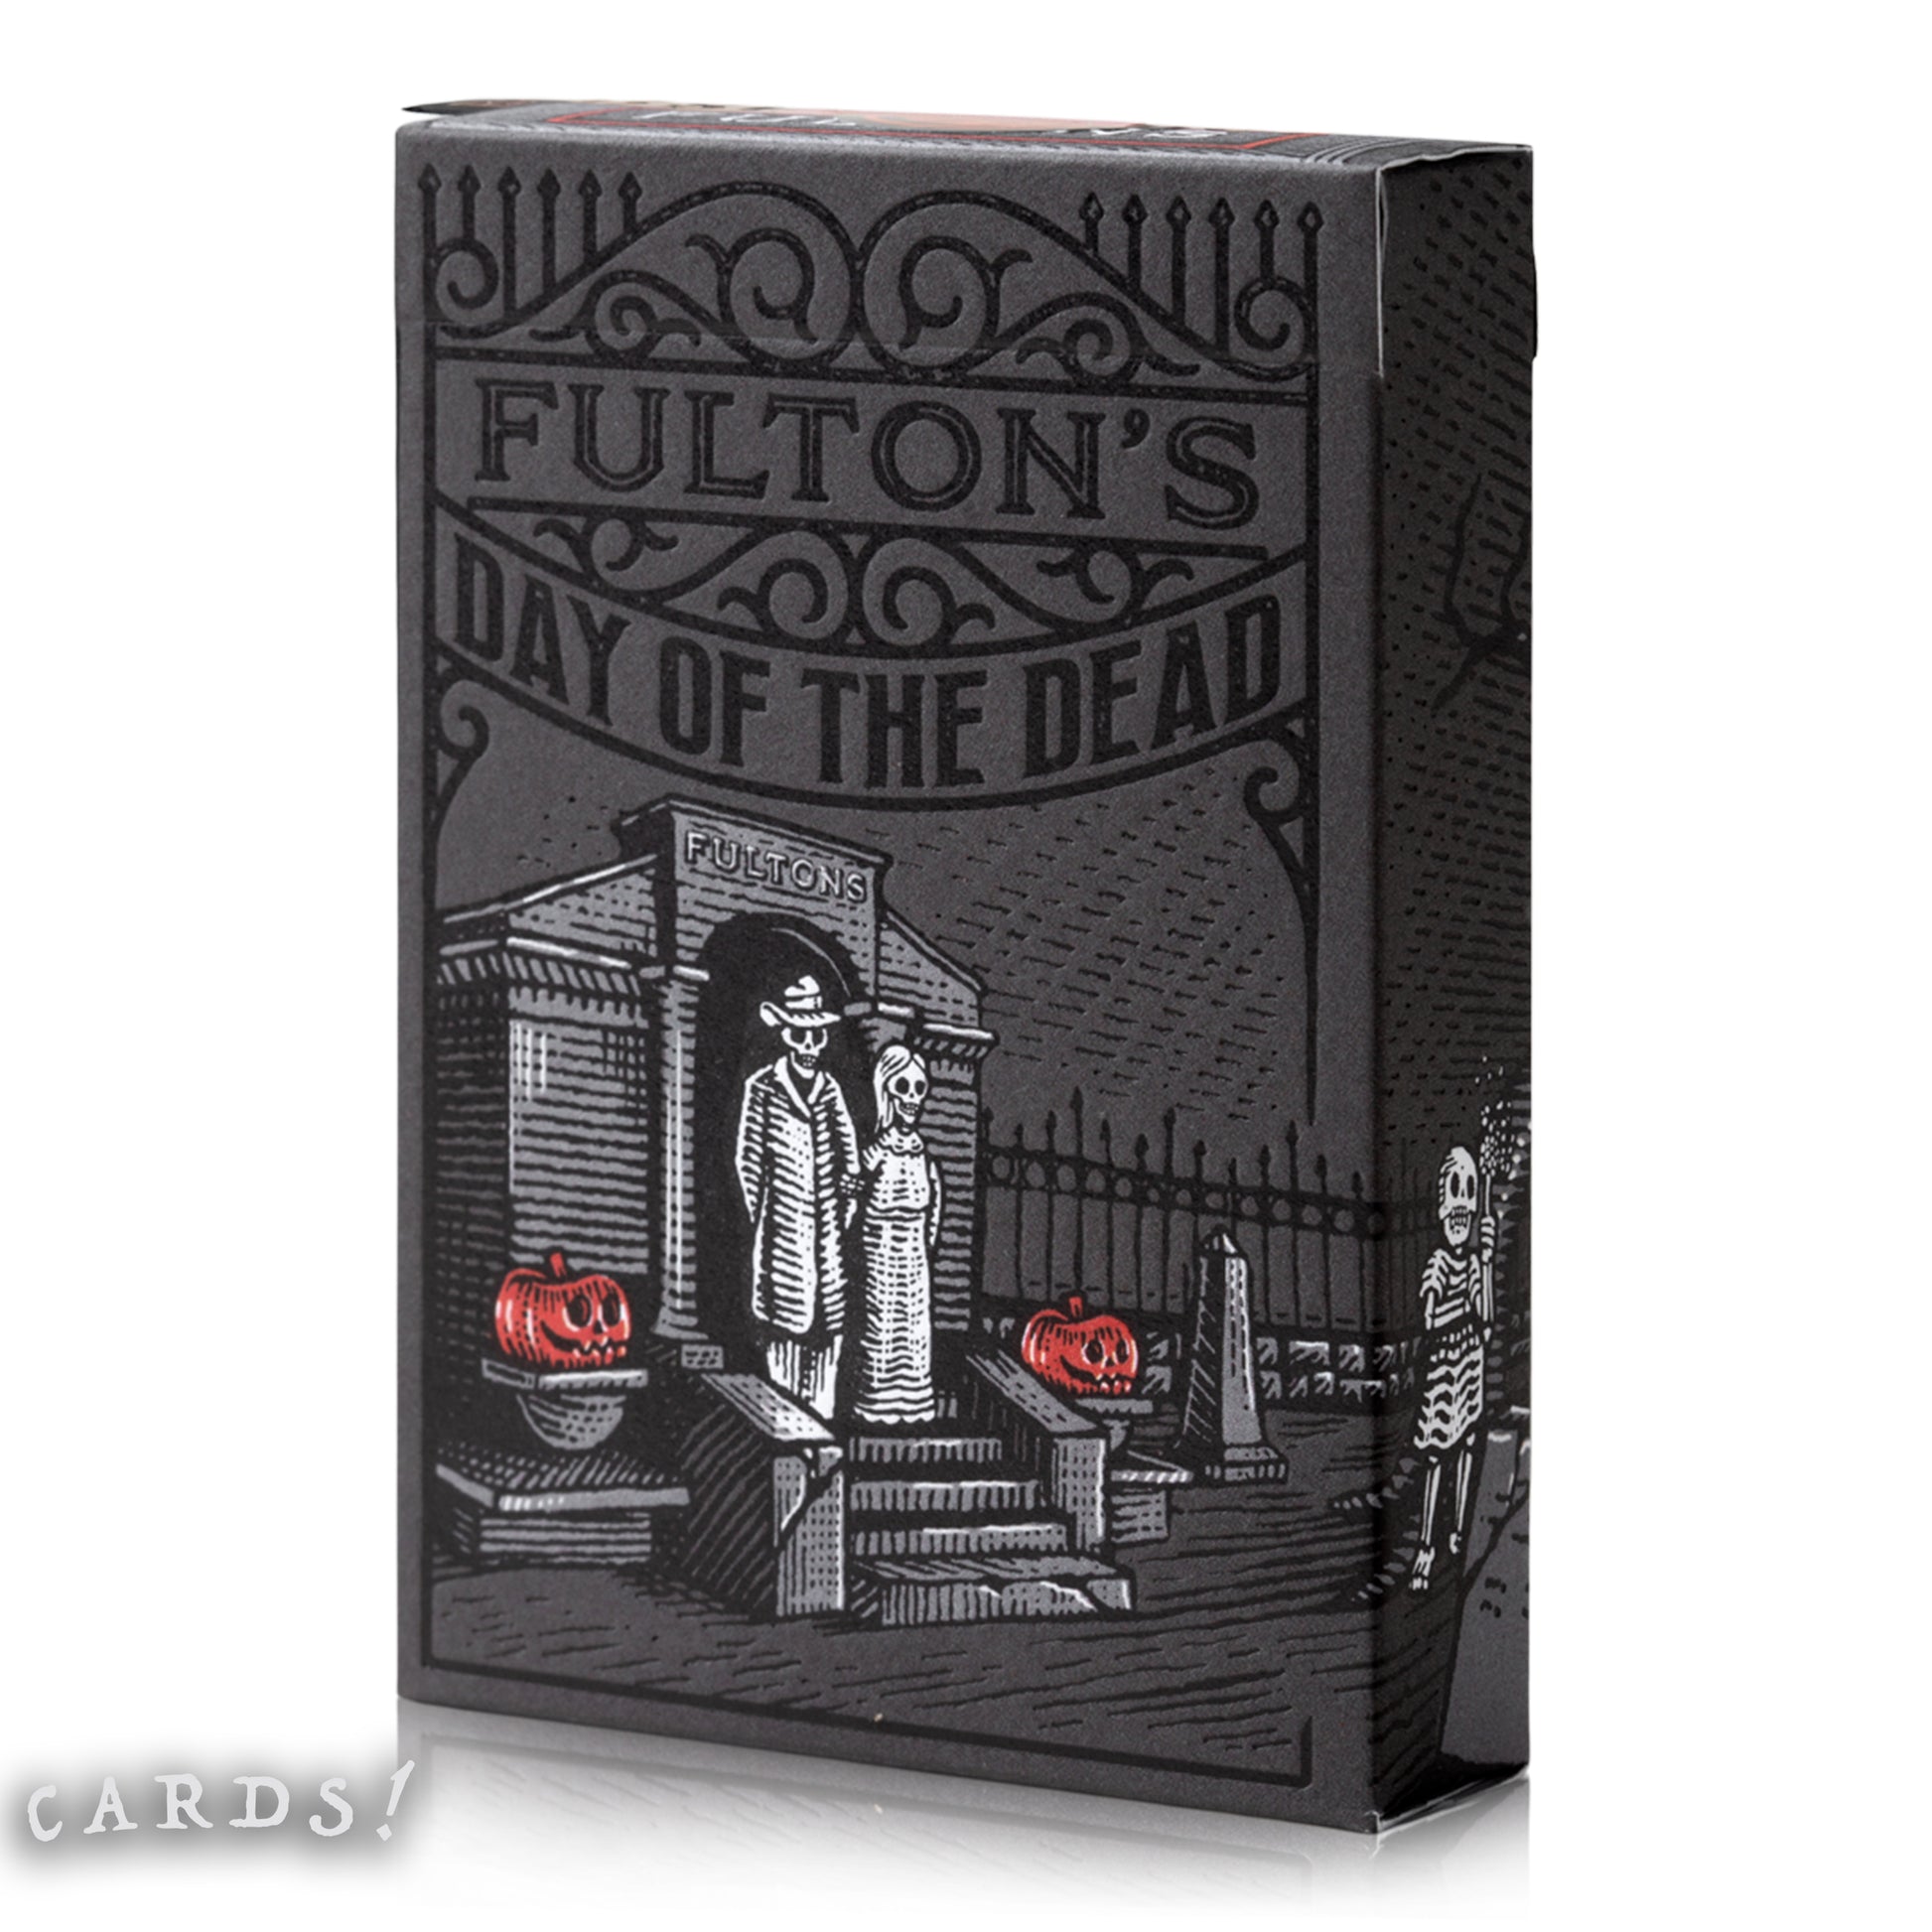 Fulton's Day of the Dead 富爾頓的亡靈節 啤牌 撲克牌 - The Lanes HK